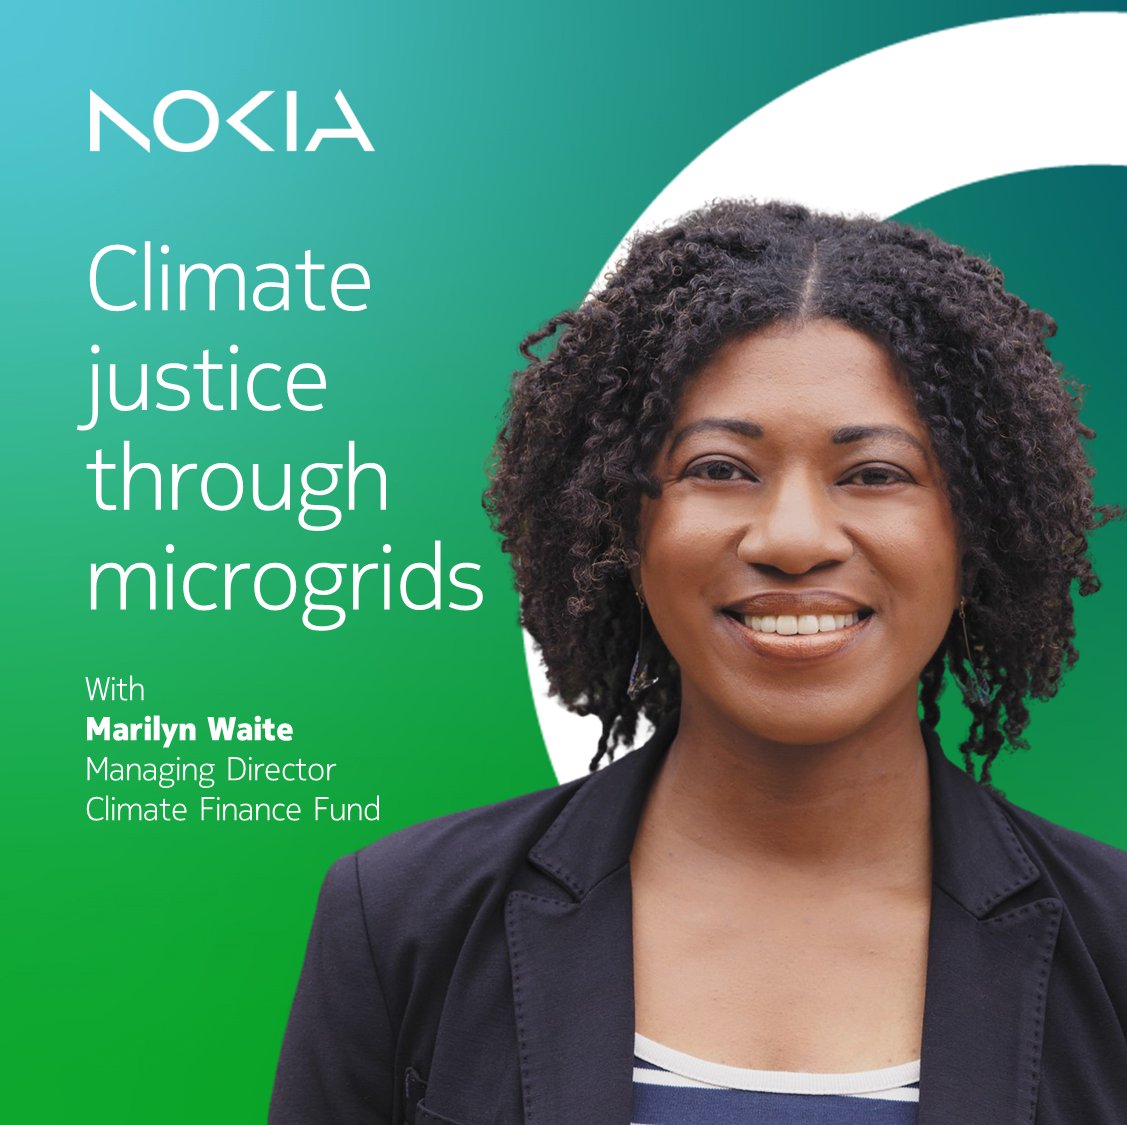 How do communities burdened by the cost of energy lift themselves out of poverty while reducing their carbon footprint? For The Climate Finance Fund’s Marilyn Waite, #microgridtechnology is a solution.

Listen to the full #podcast: nokia.ly/3mL2ruE

 #climatechange